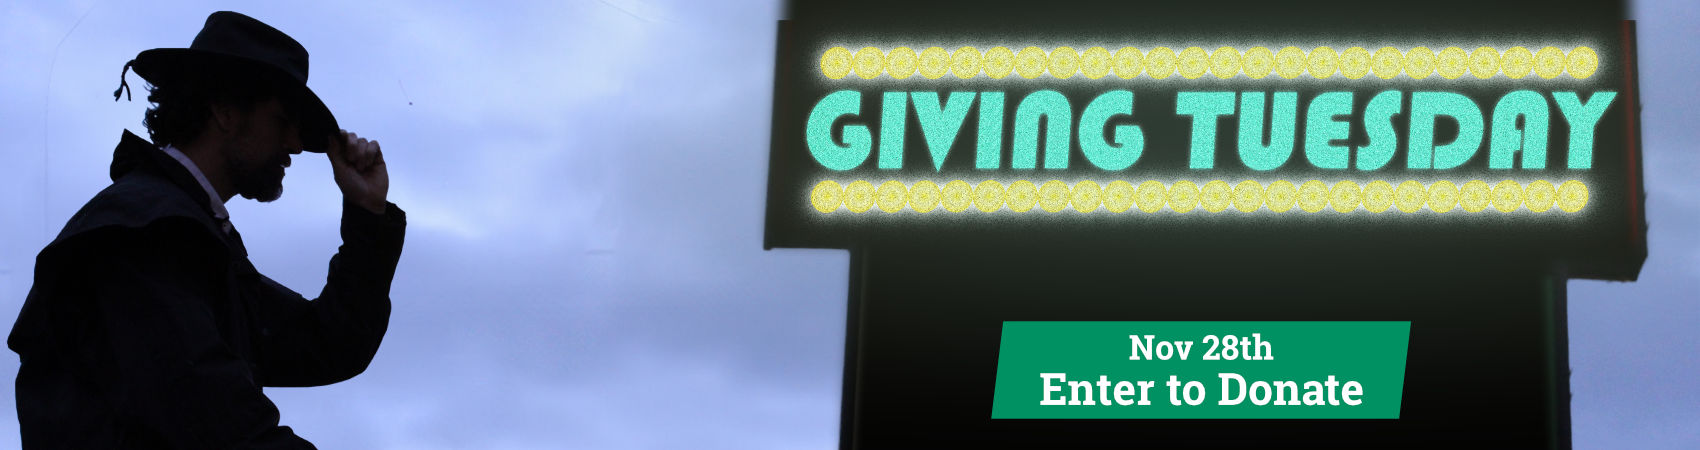 [Giving Tuesday November 28th, Enter to donate] - Neon sign of giving tuesday, with the date of November 28th, with the silhouette of a man in a hat